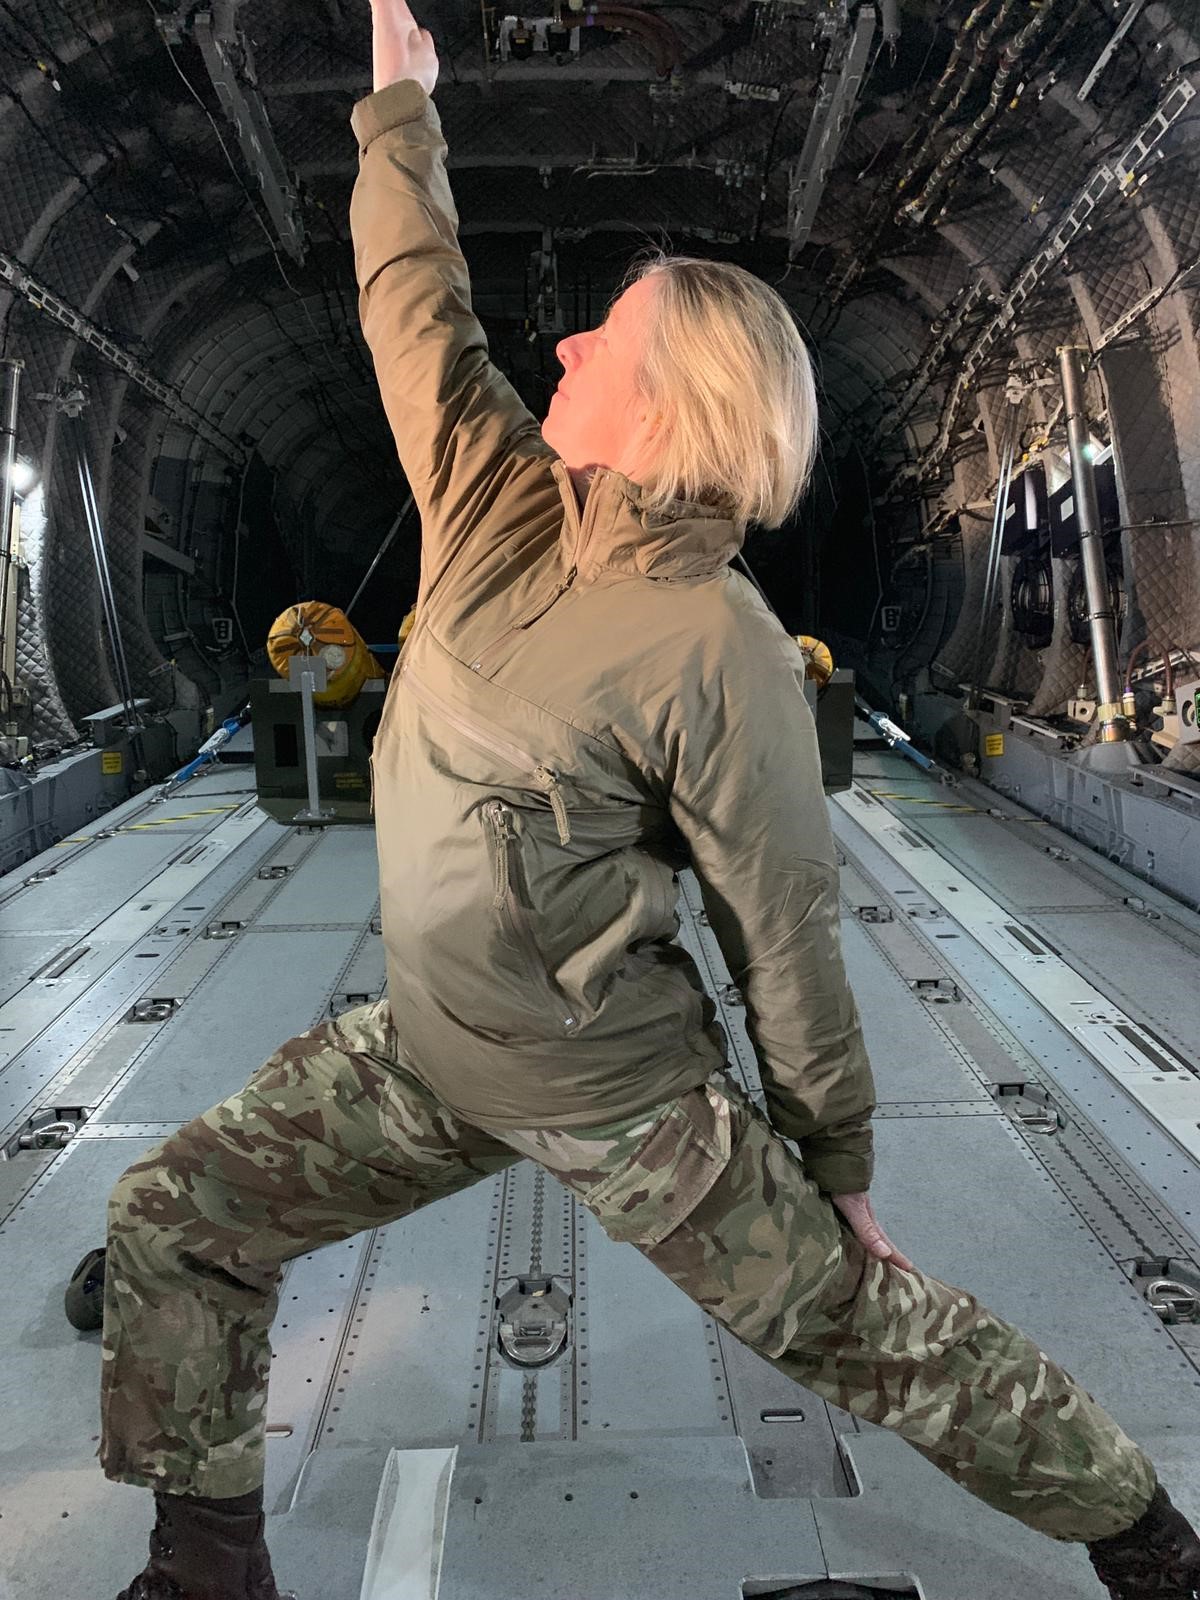 Personnel doing yoga in aircraft.